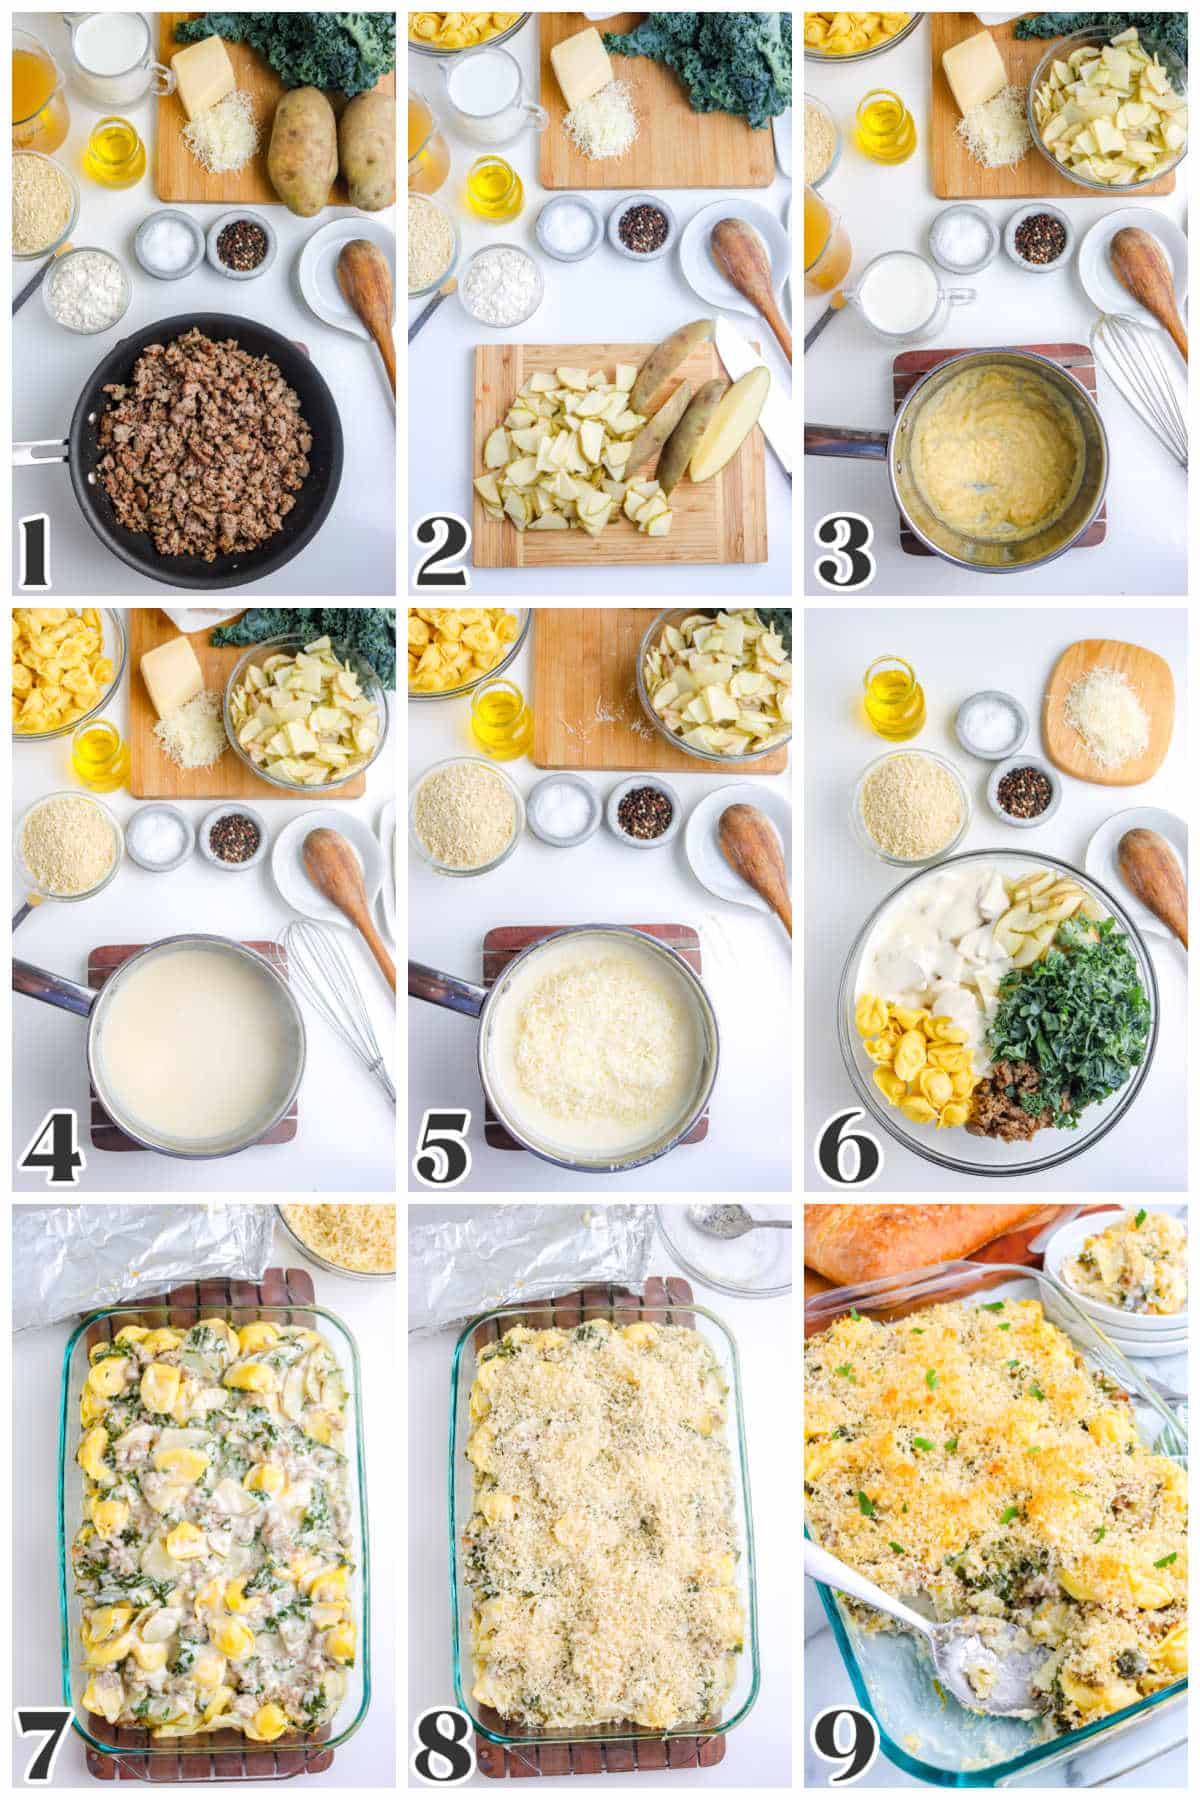 A picture collage showing how to make this entire recipe from the creamy sauce to baking and serving.